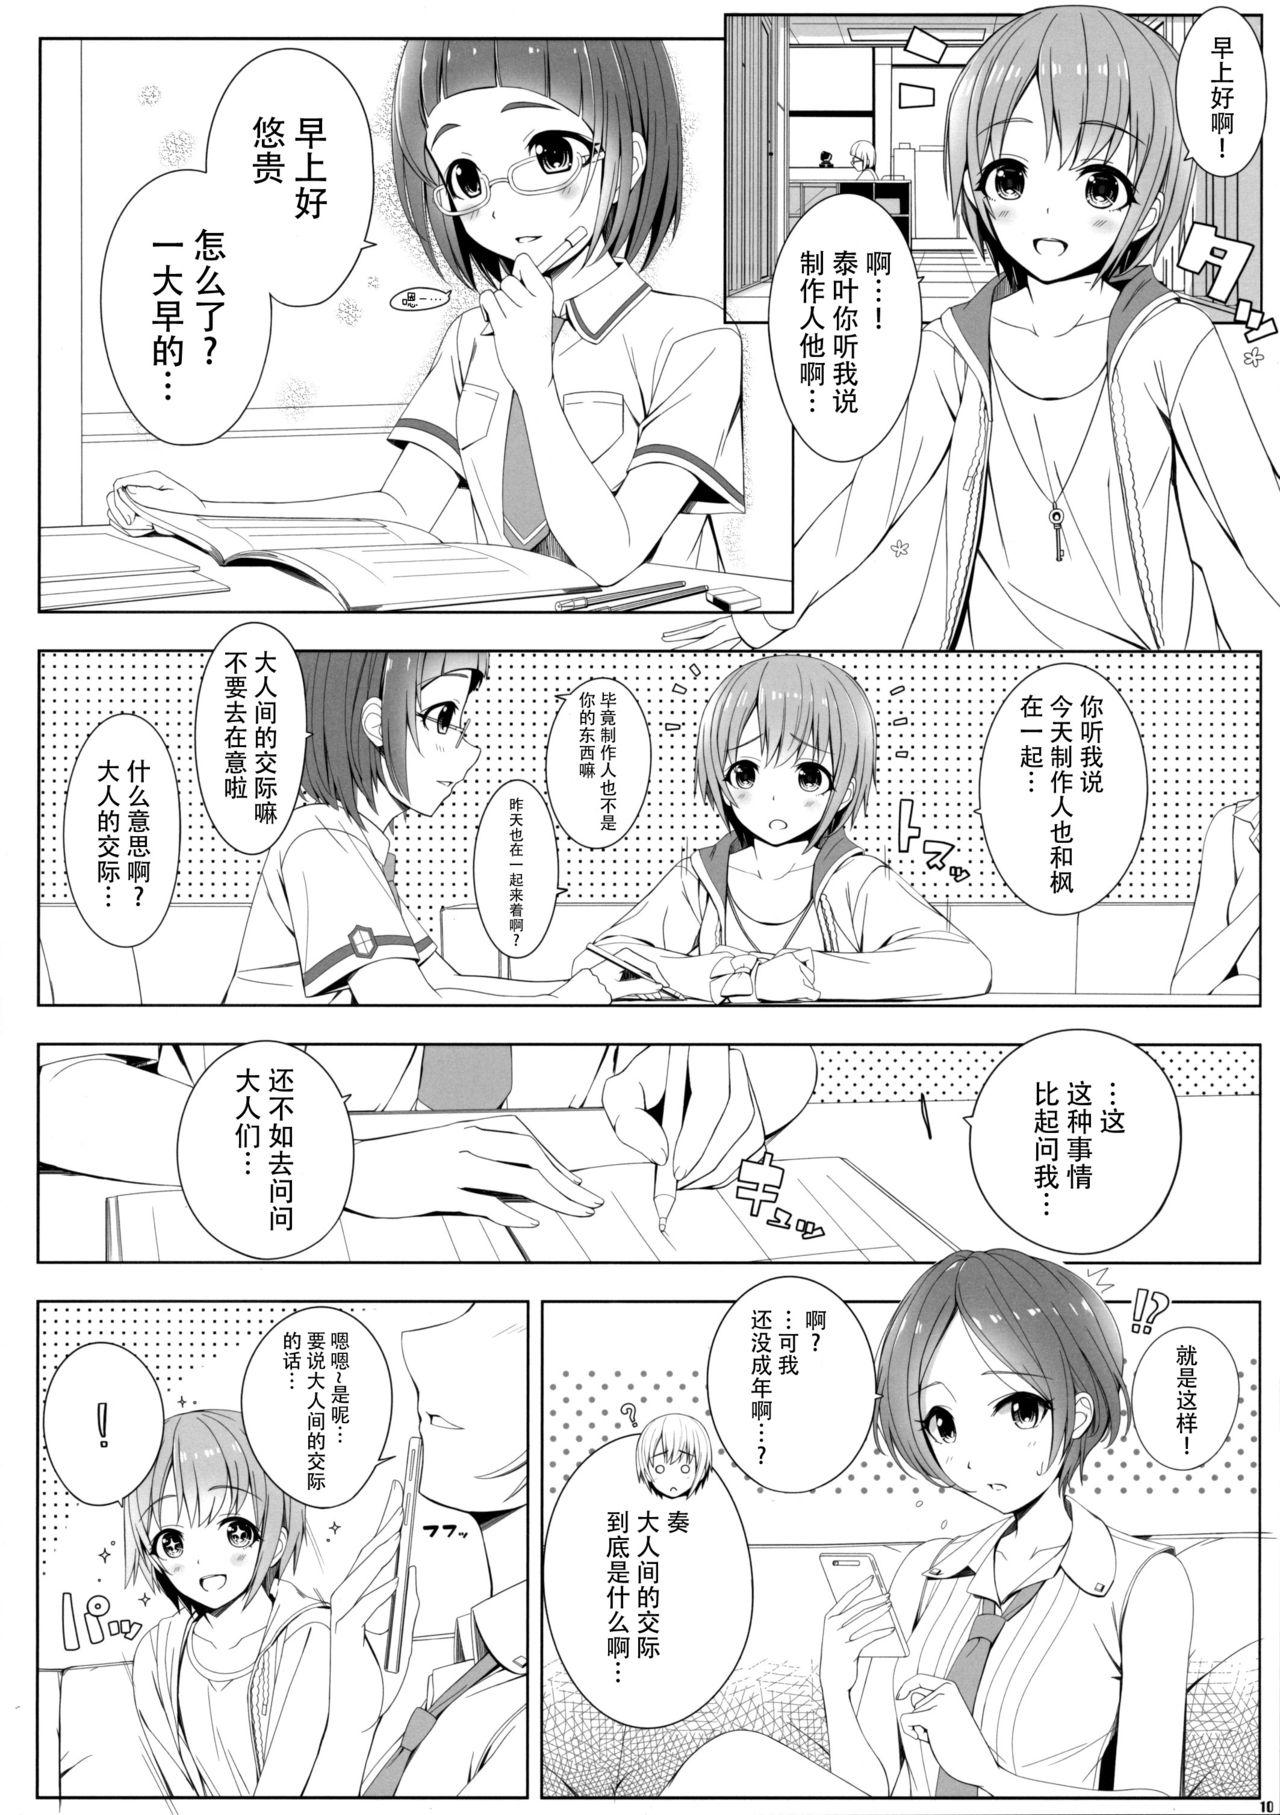 Smooth SESSION - The idolmaster Making Love Porn - Page 10